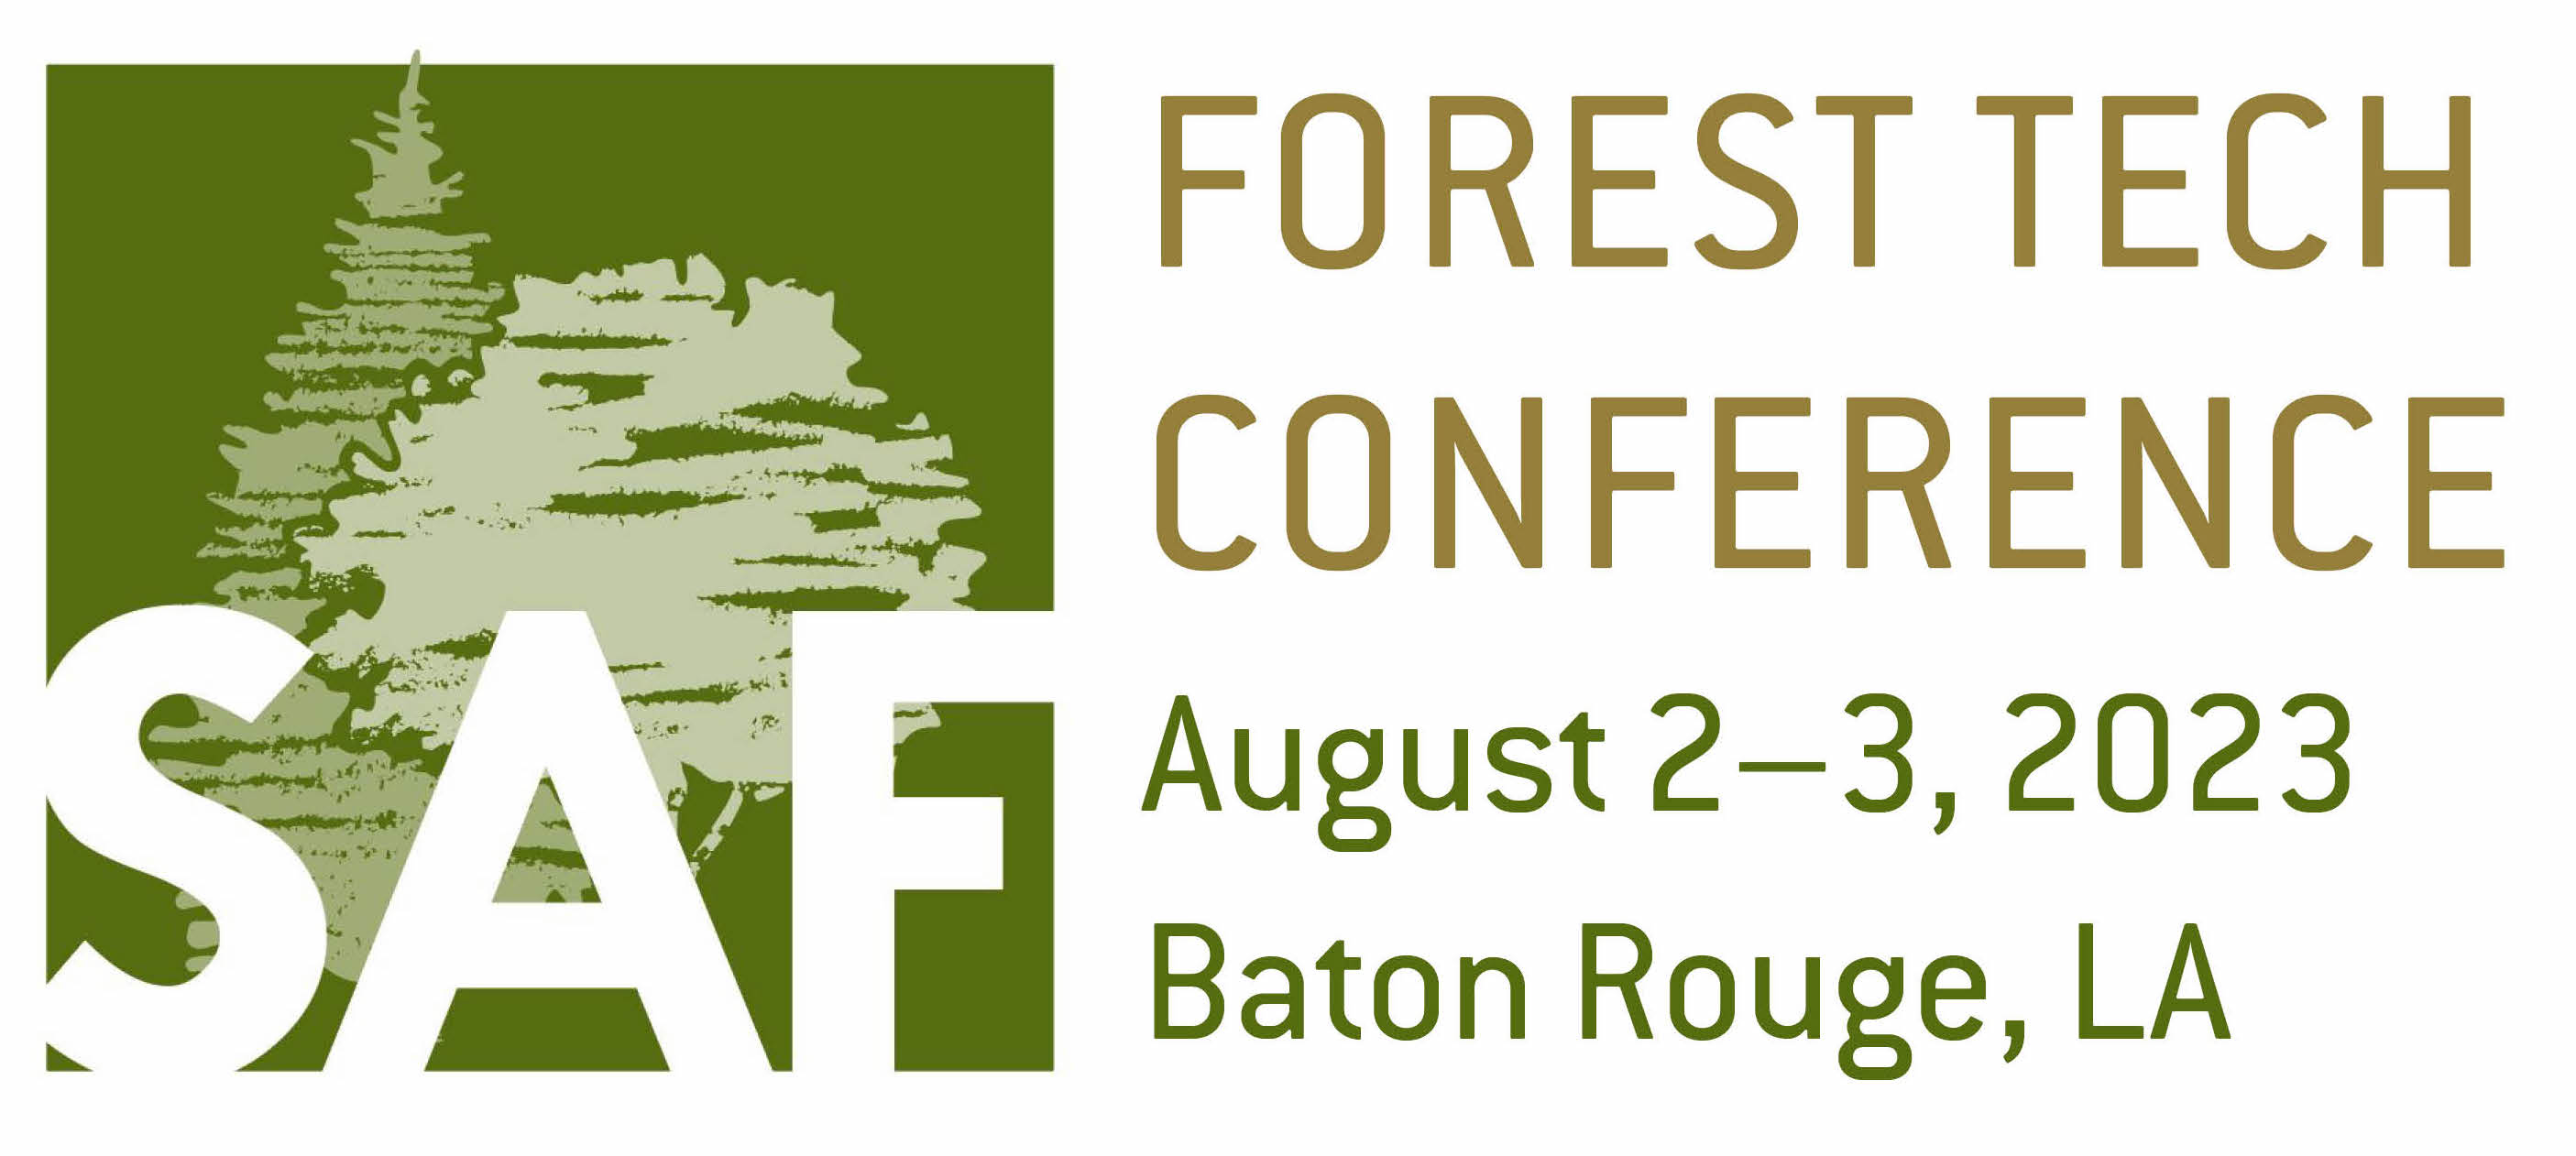 2023 Forest Tech Conference - Baton Rouge, Louisiana